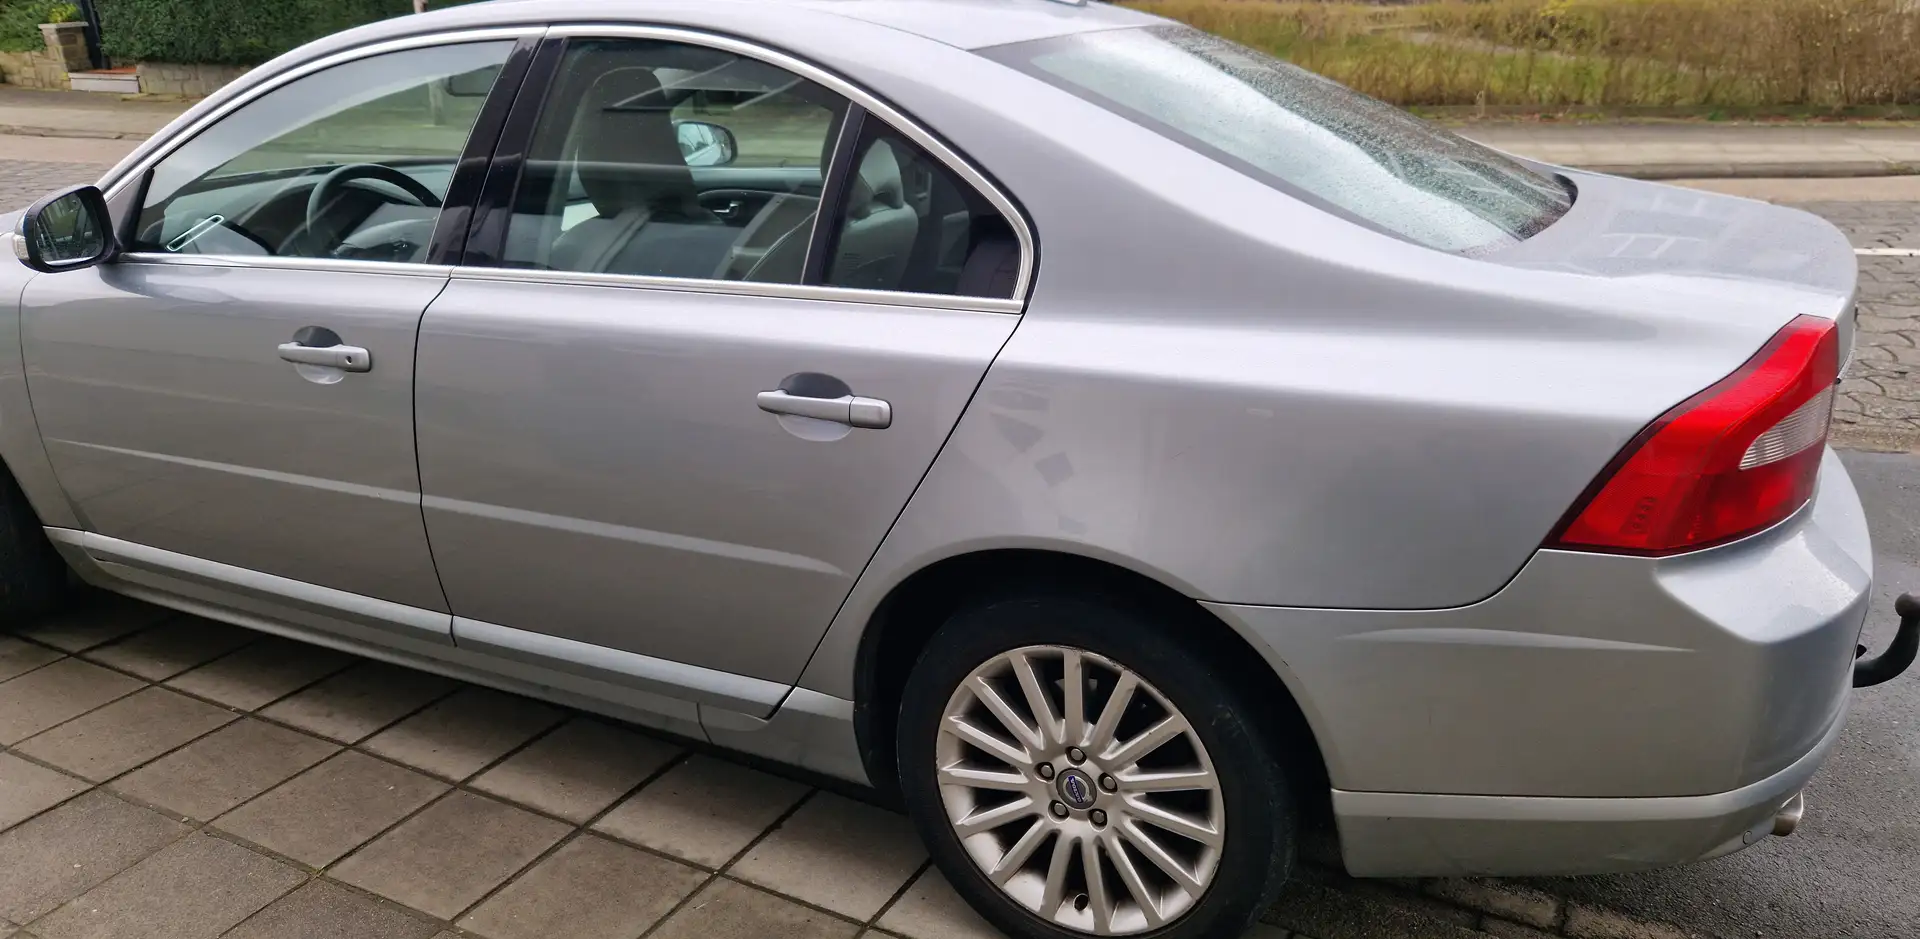 Volvo S80 2.4 Turbo - D5 20v AWD Executive Gear. Argent - 2